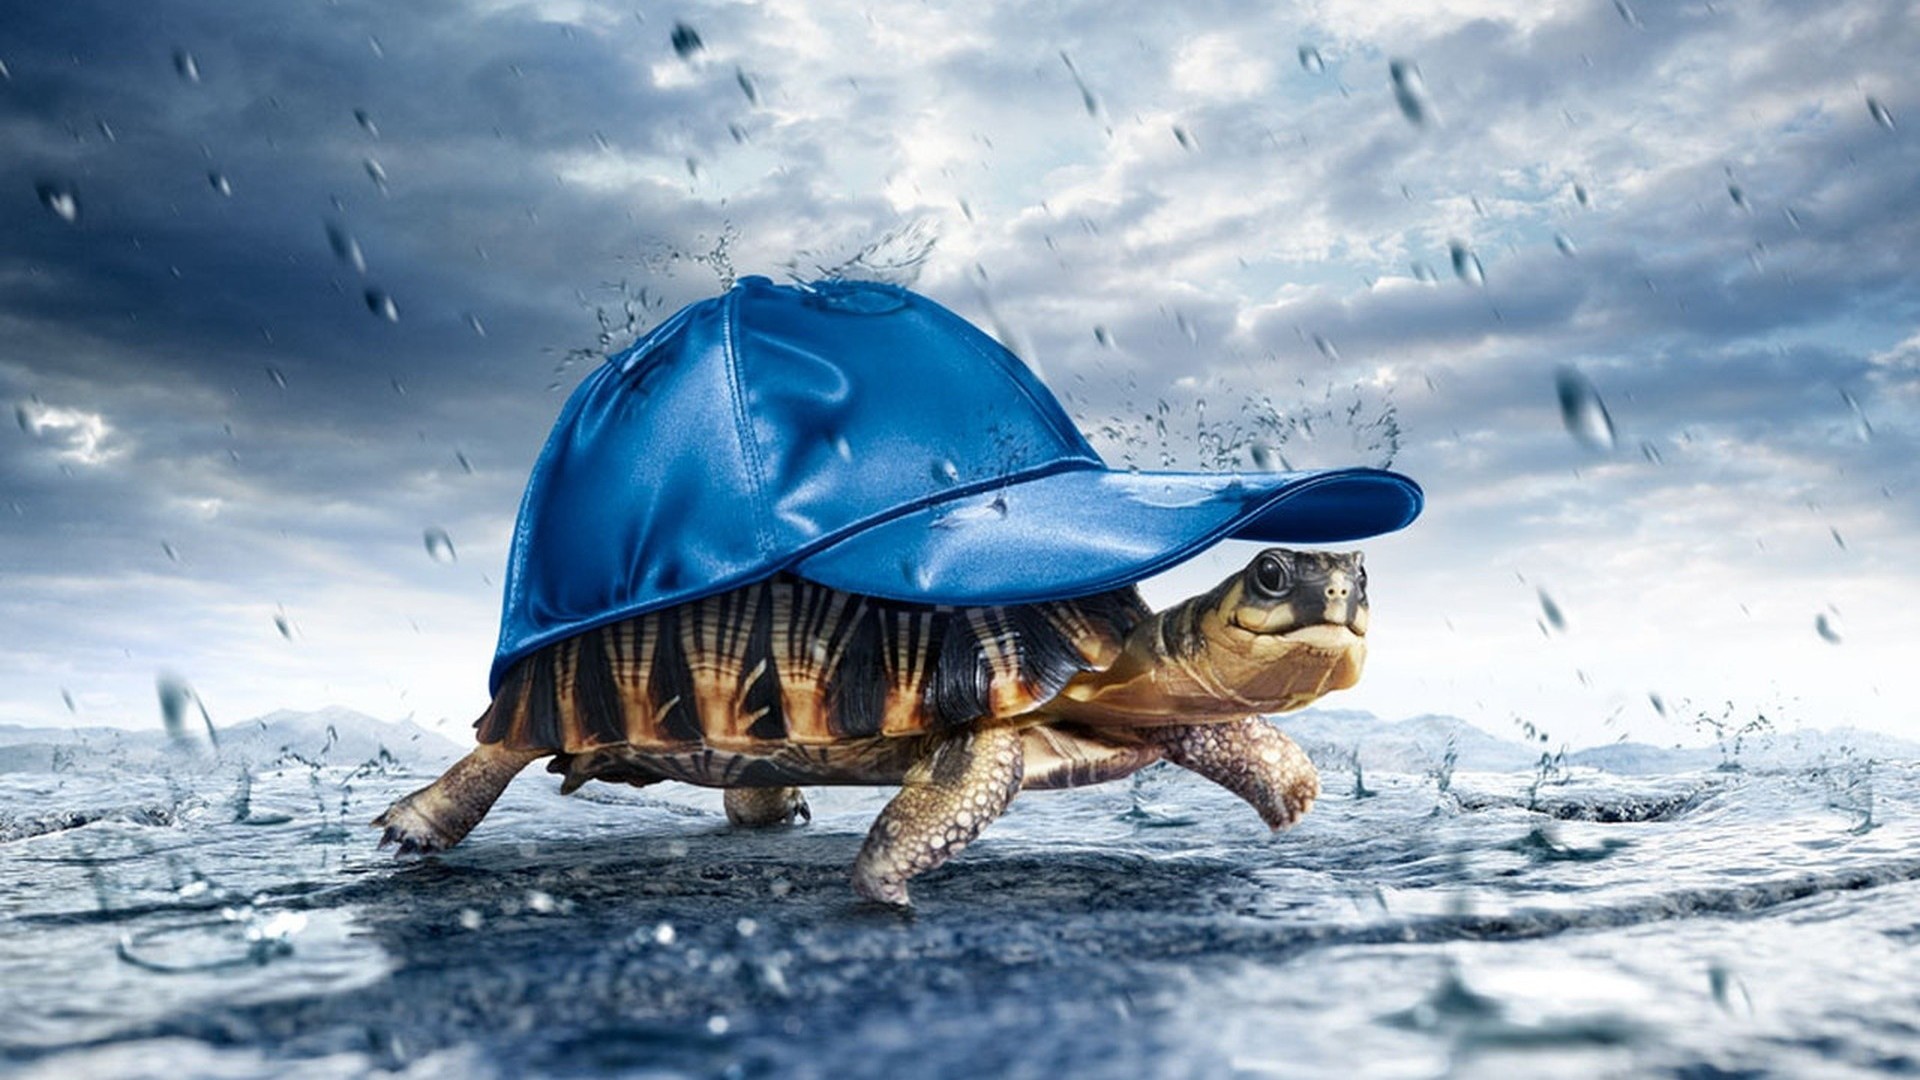 Background Rain Turtle Funny Wallpaper In High Resolution For